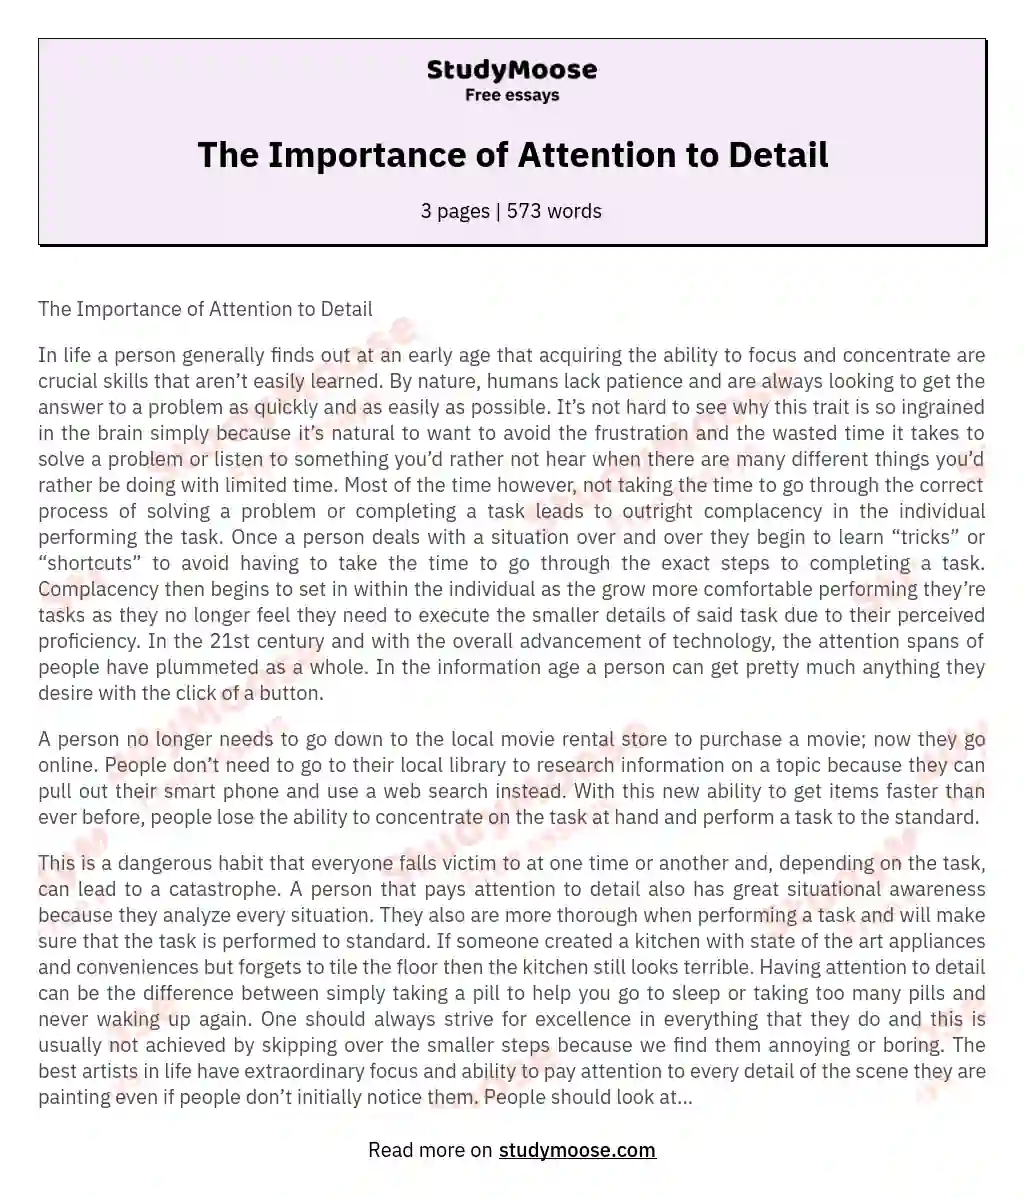 The Importance of Attention to Detail essay